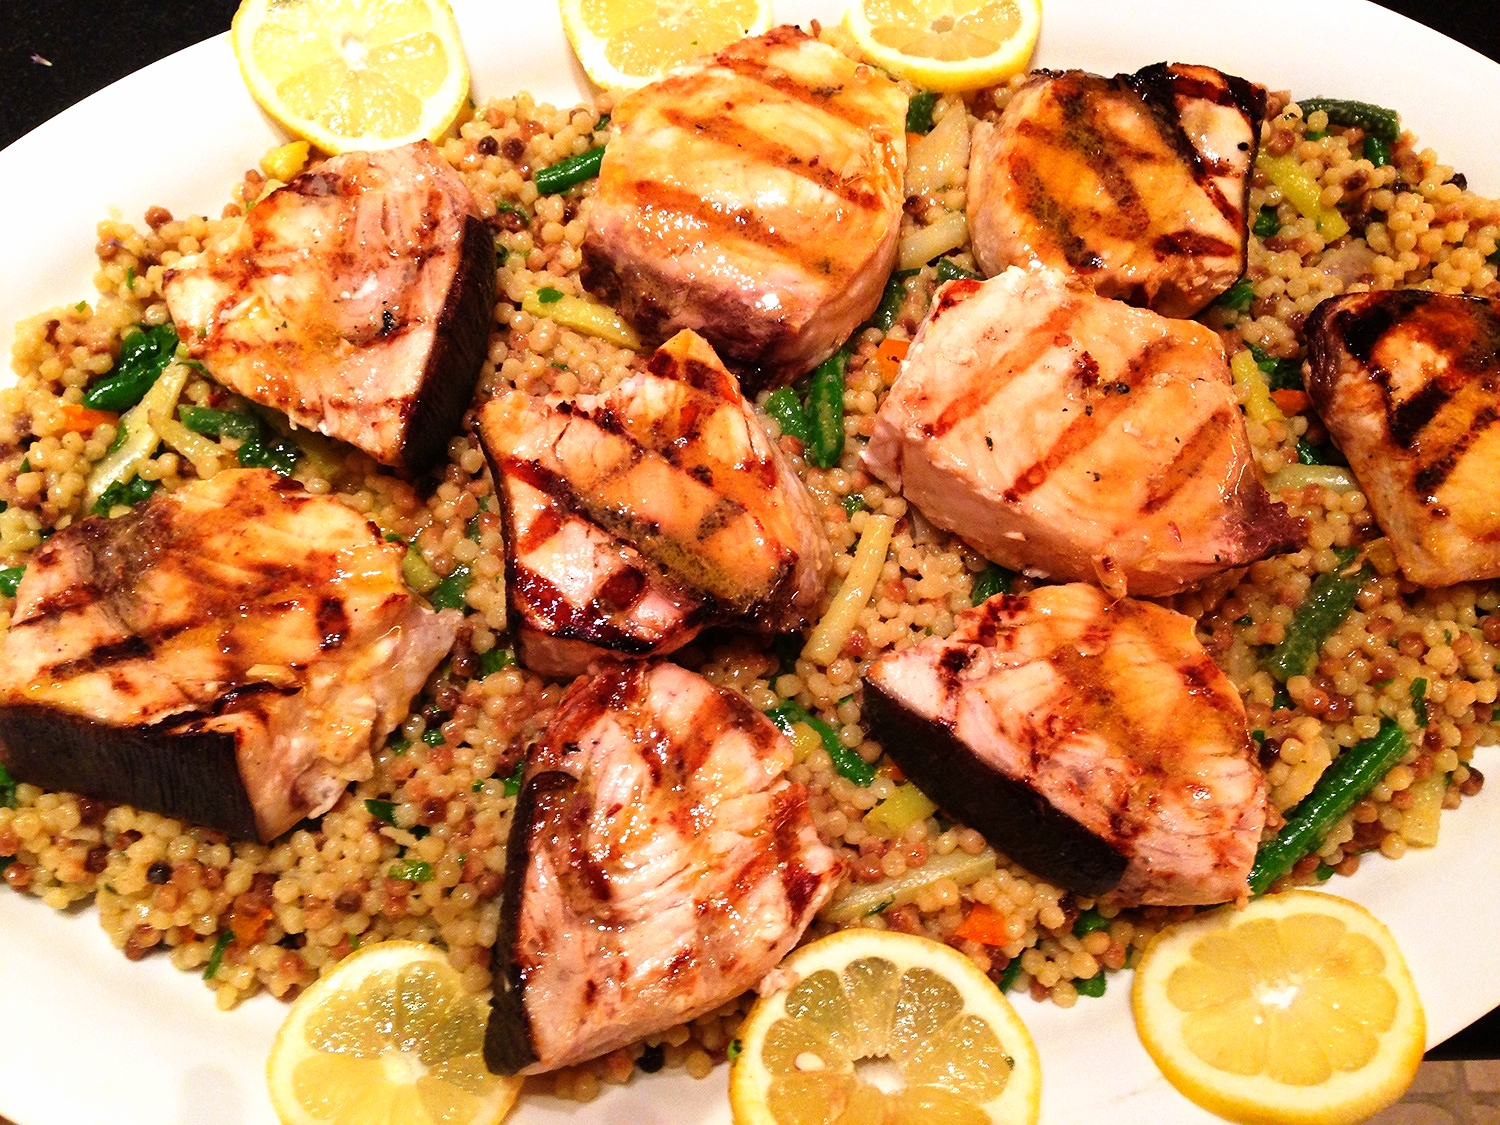 Grilled swordfish steaks on Israeli couscous with green and wax beans, herbs, and lemon citronette